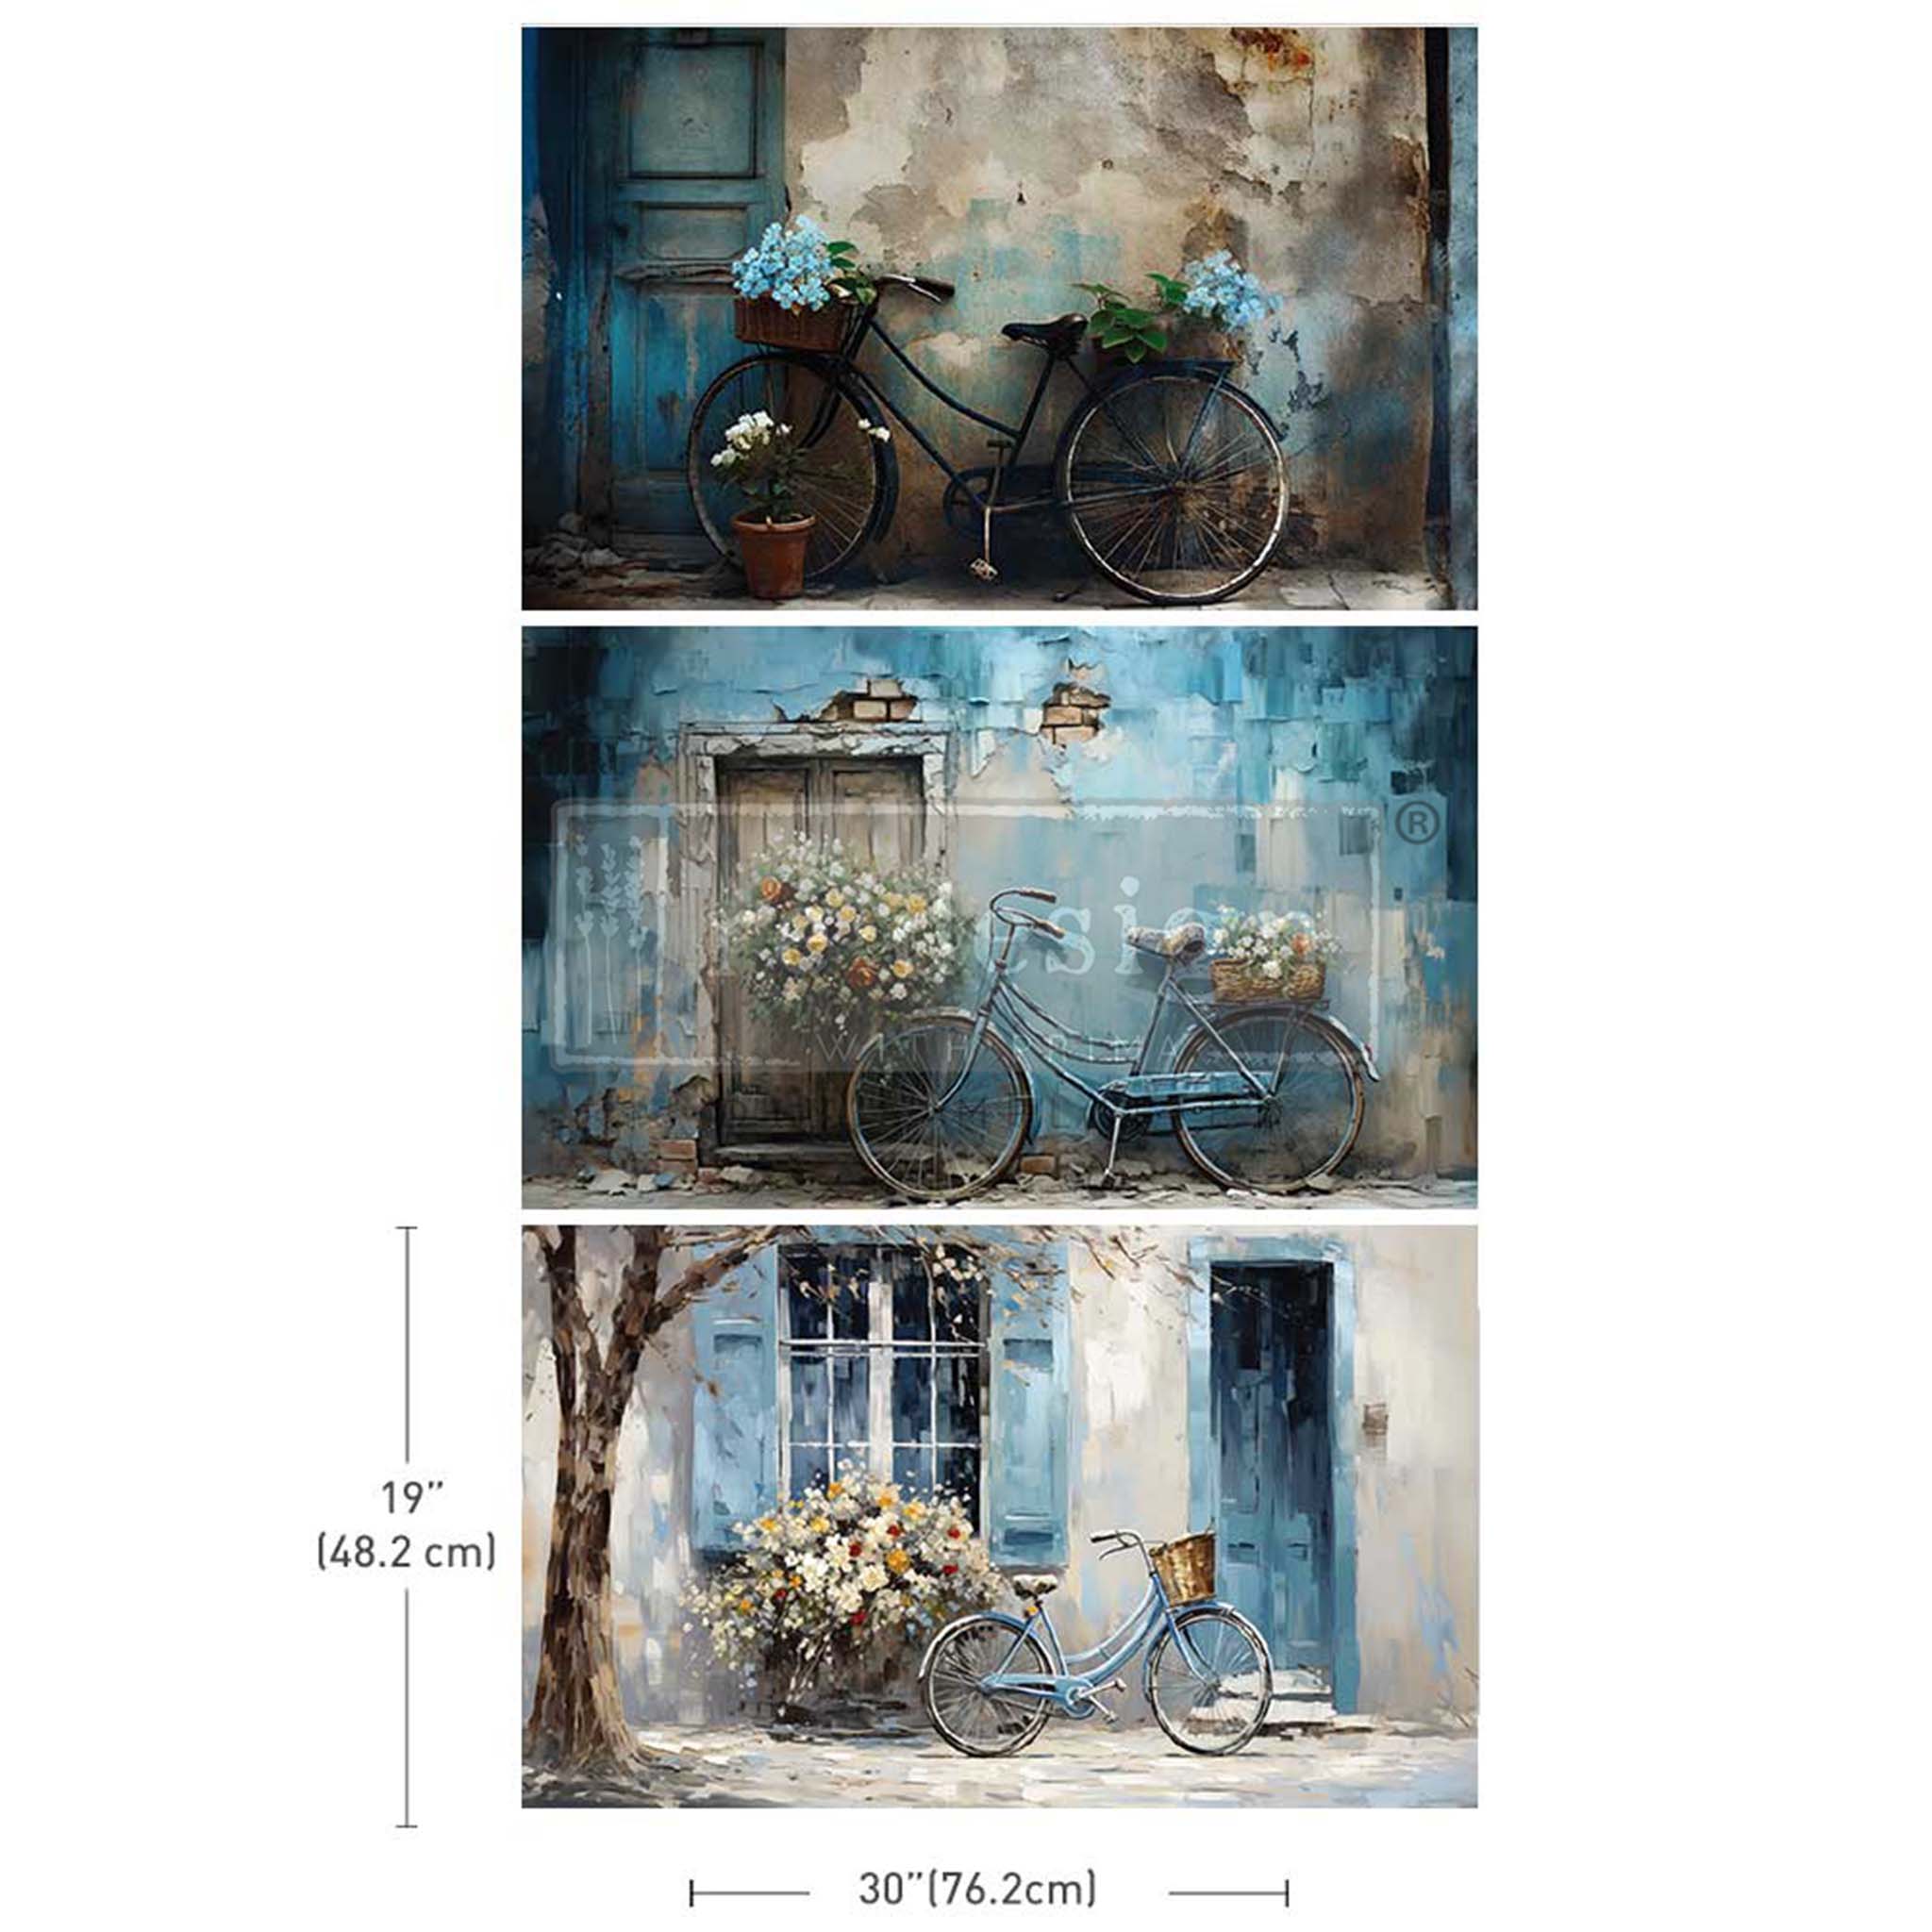 Tissue paper designs that feature 3 charming designs of blue bicycles against romantic home scenes. White borders surround the 3 papers with measurements showing 19" (48.2 cm) by 30" (76.2 cm) for 1 sheet.